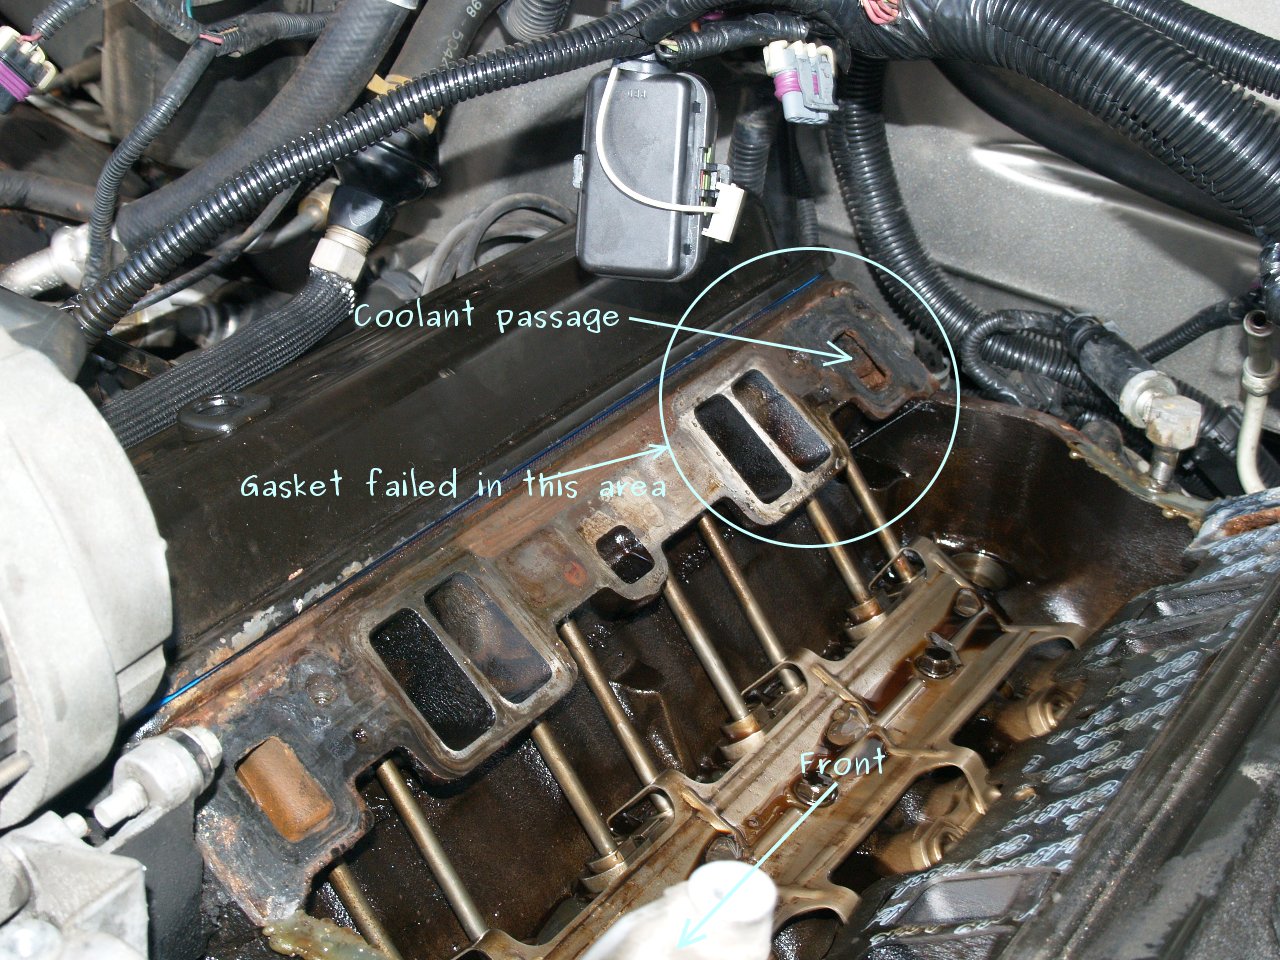 See P0920 in engine